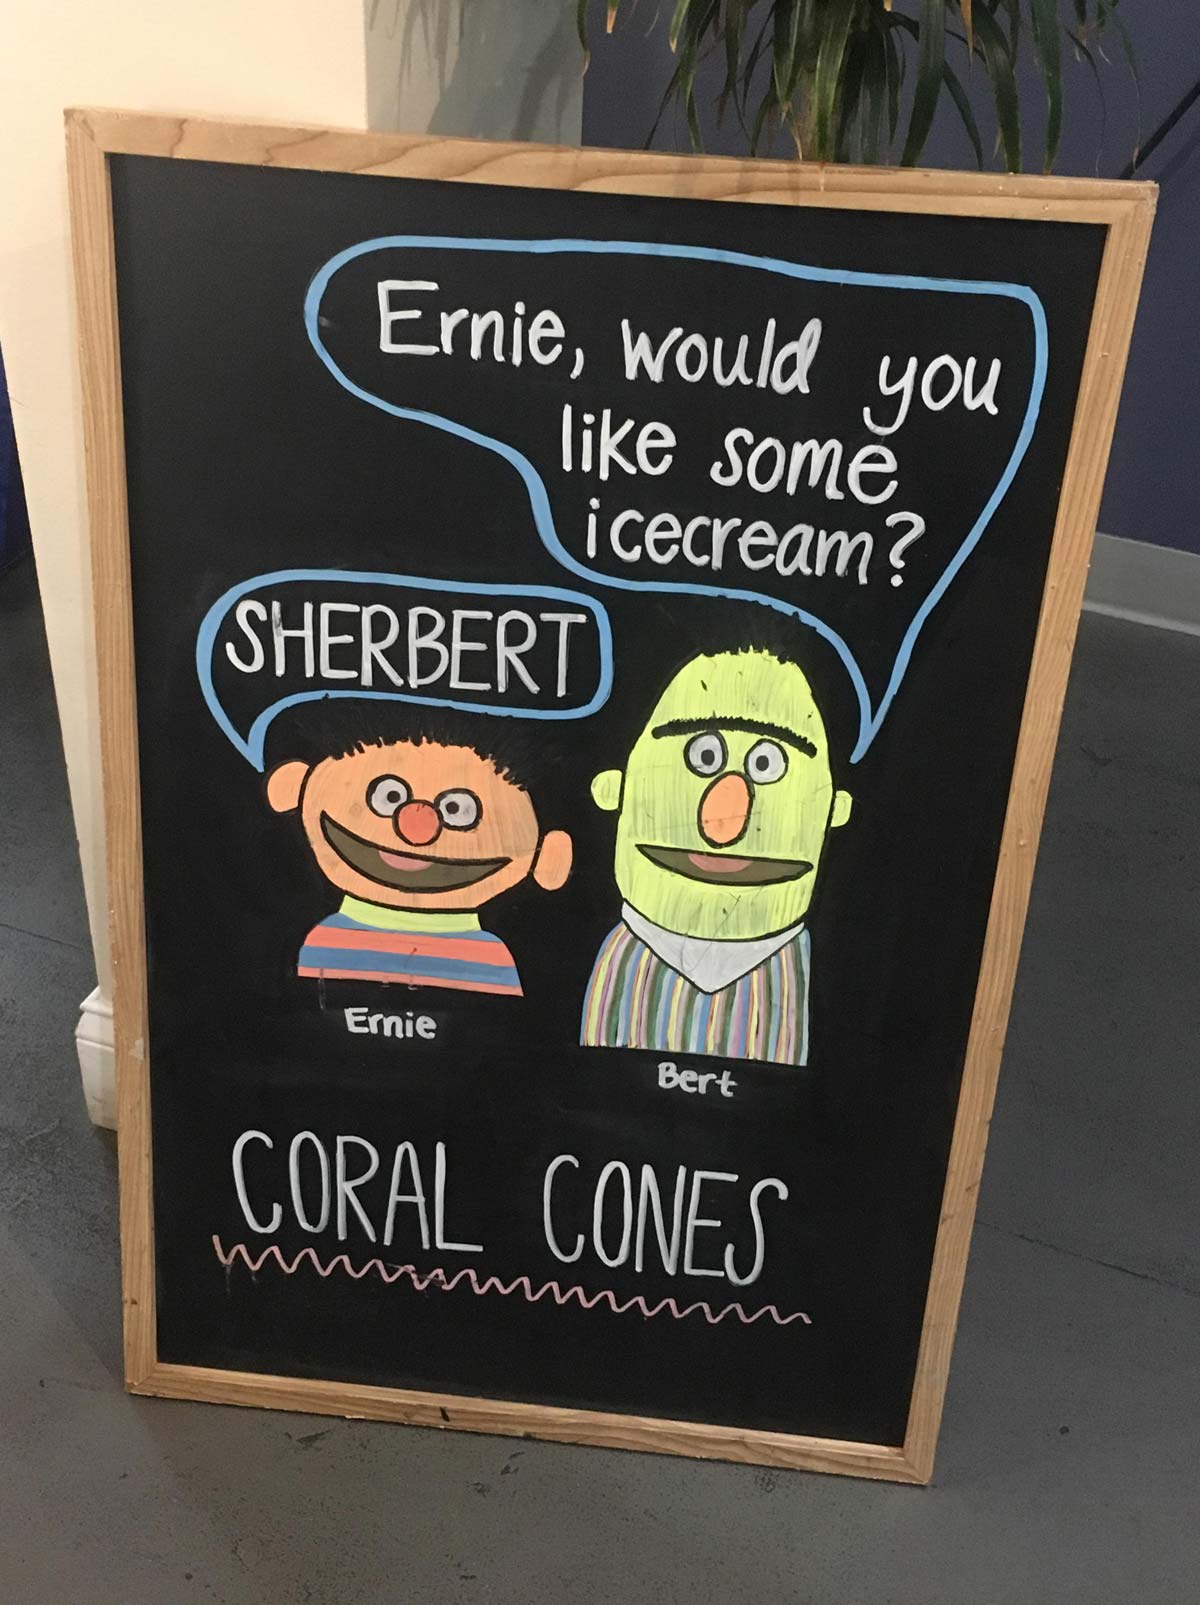 Sign at the ice cream shop